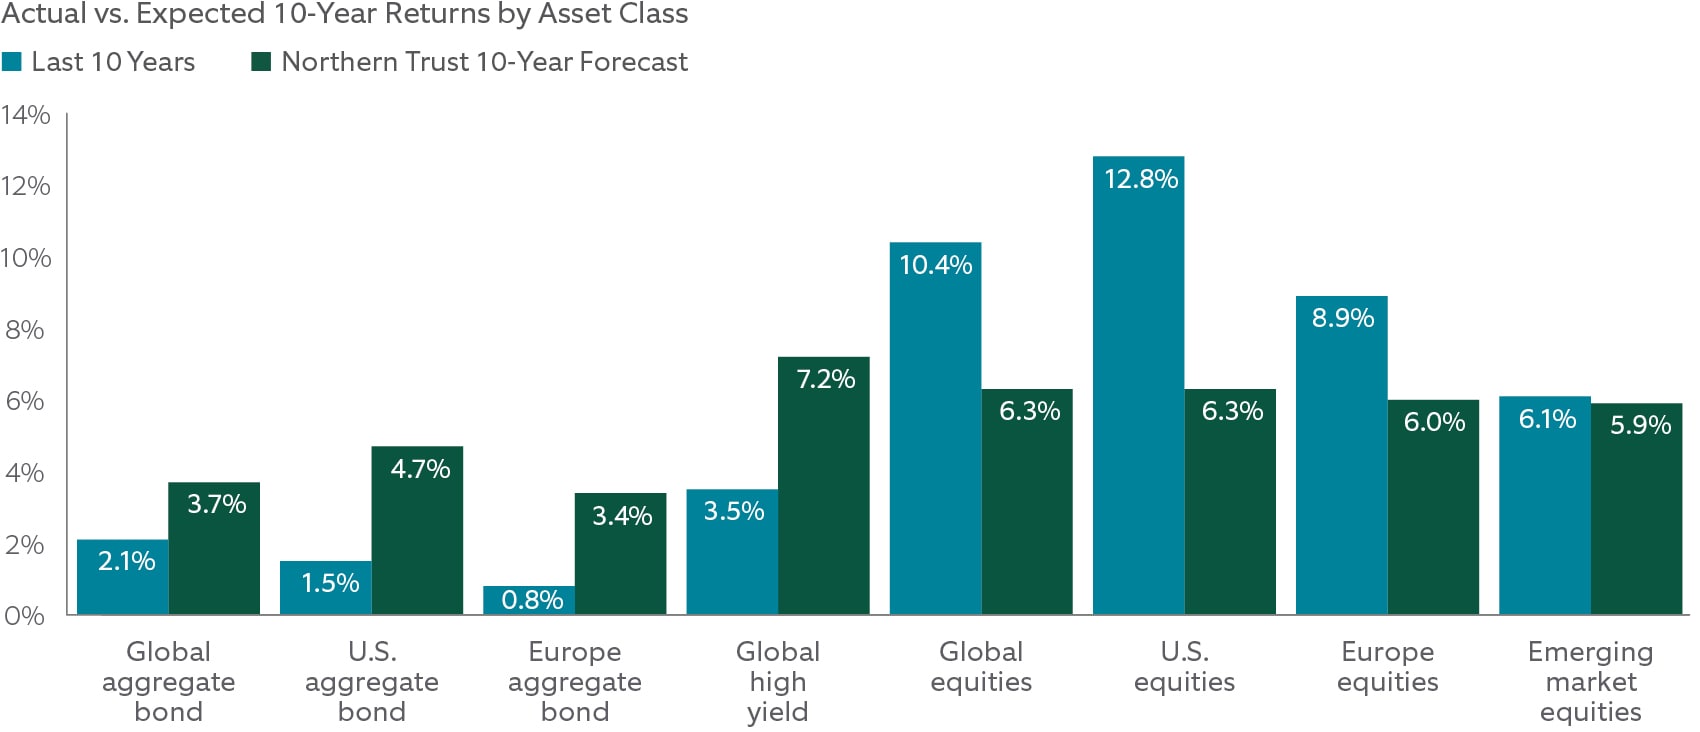 Actual vs. Expected 10-Year Returns by Asset Class